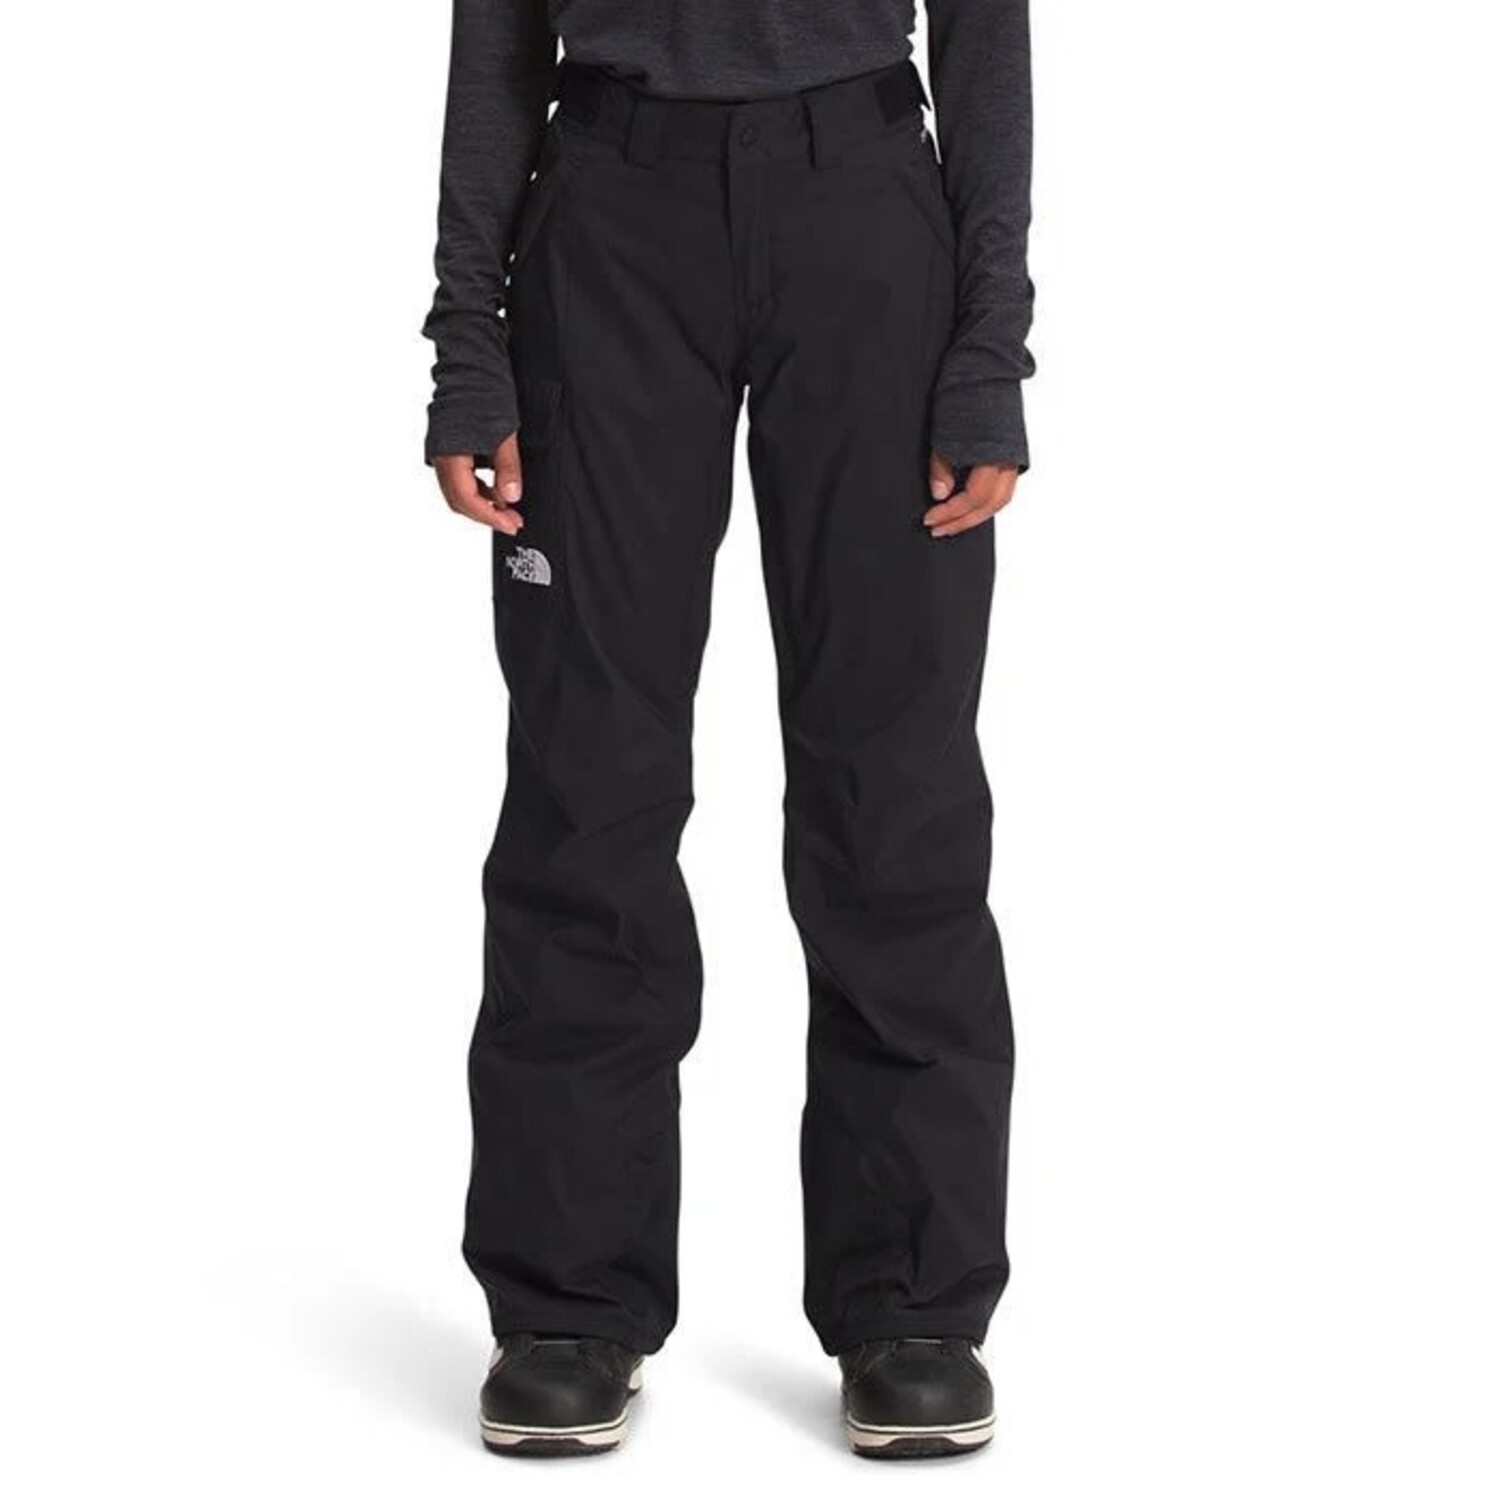 THE NORTH FACE FREEDOM INSULATED PANT | BLACK